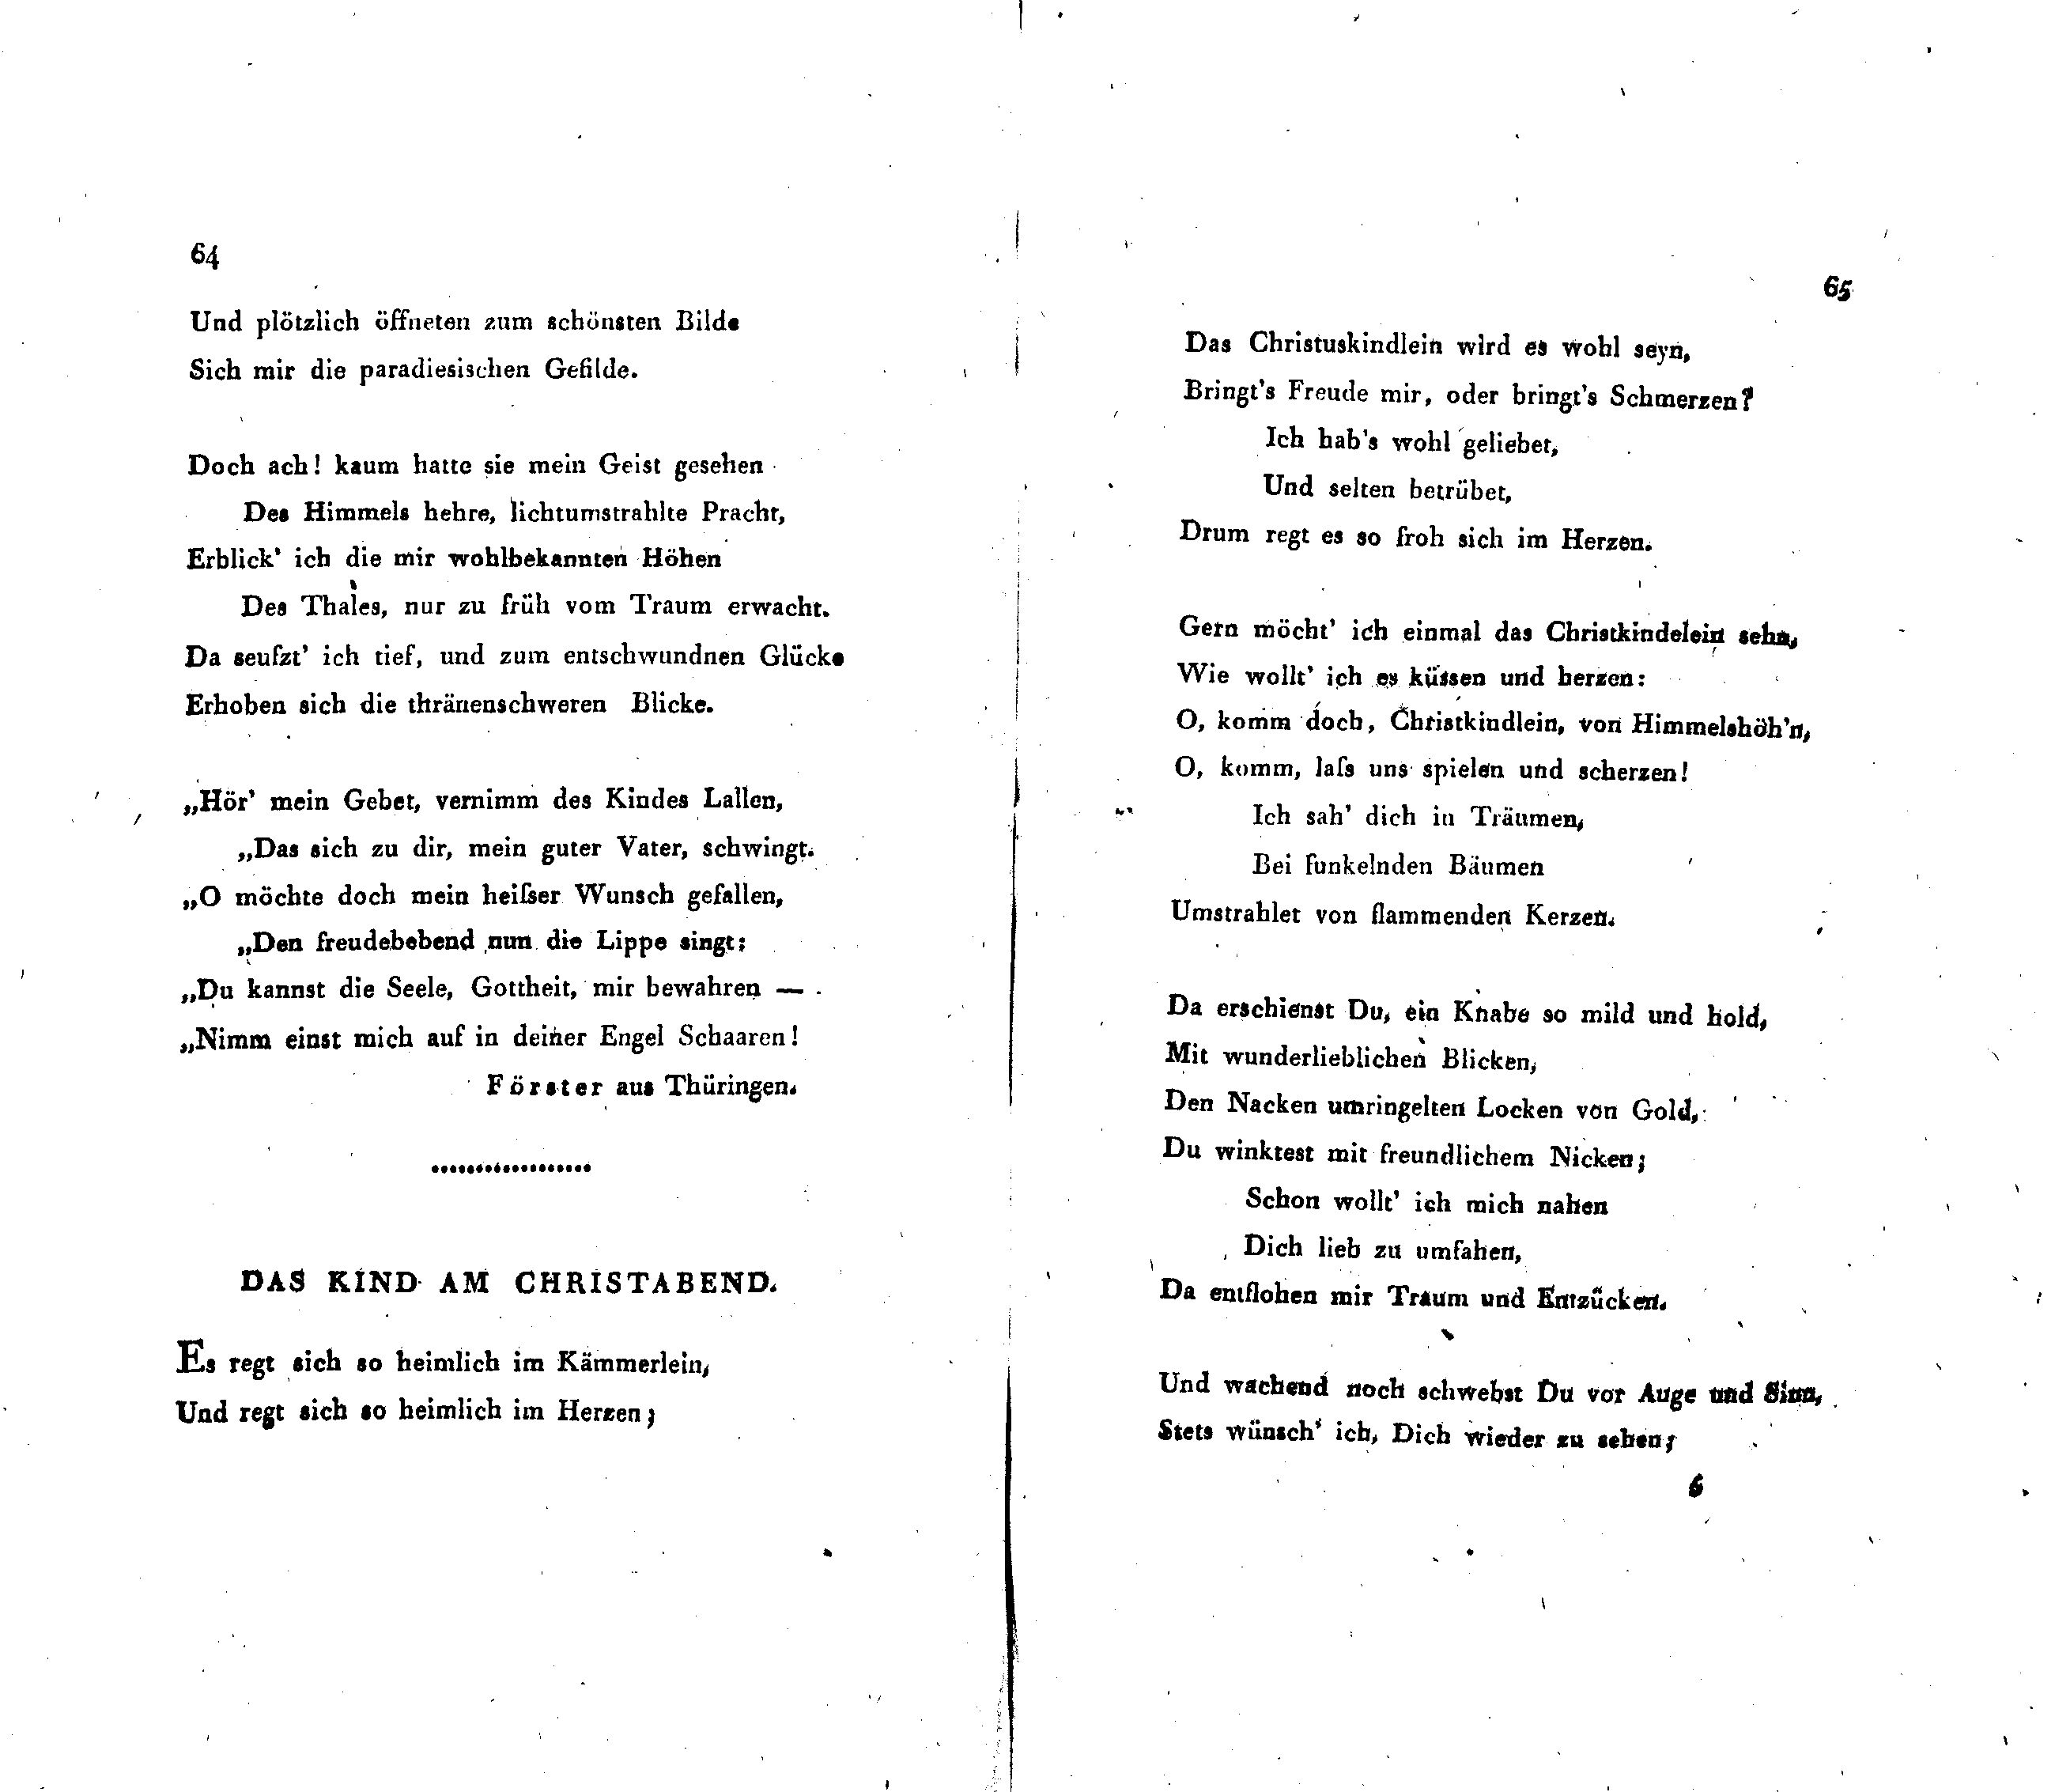 Das Kind am Christabend (1820) | 1. (64-65) Main body of text